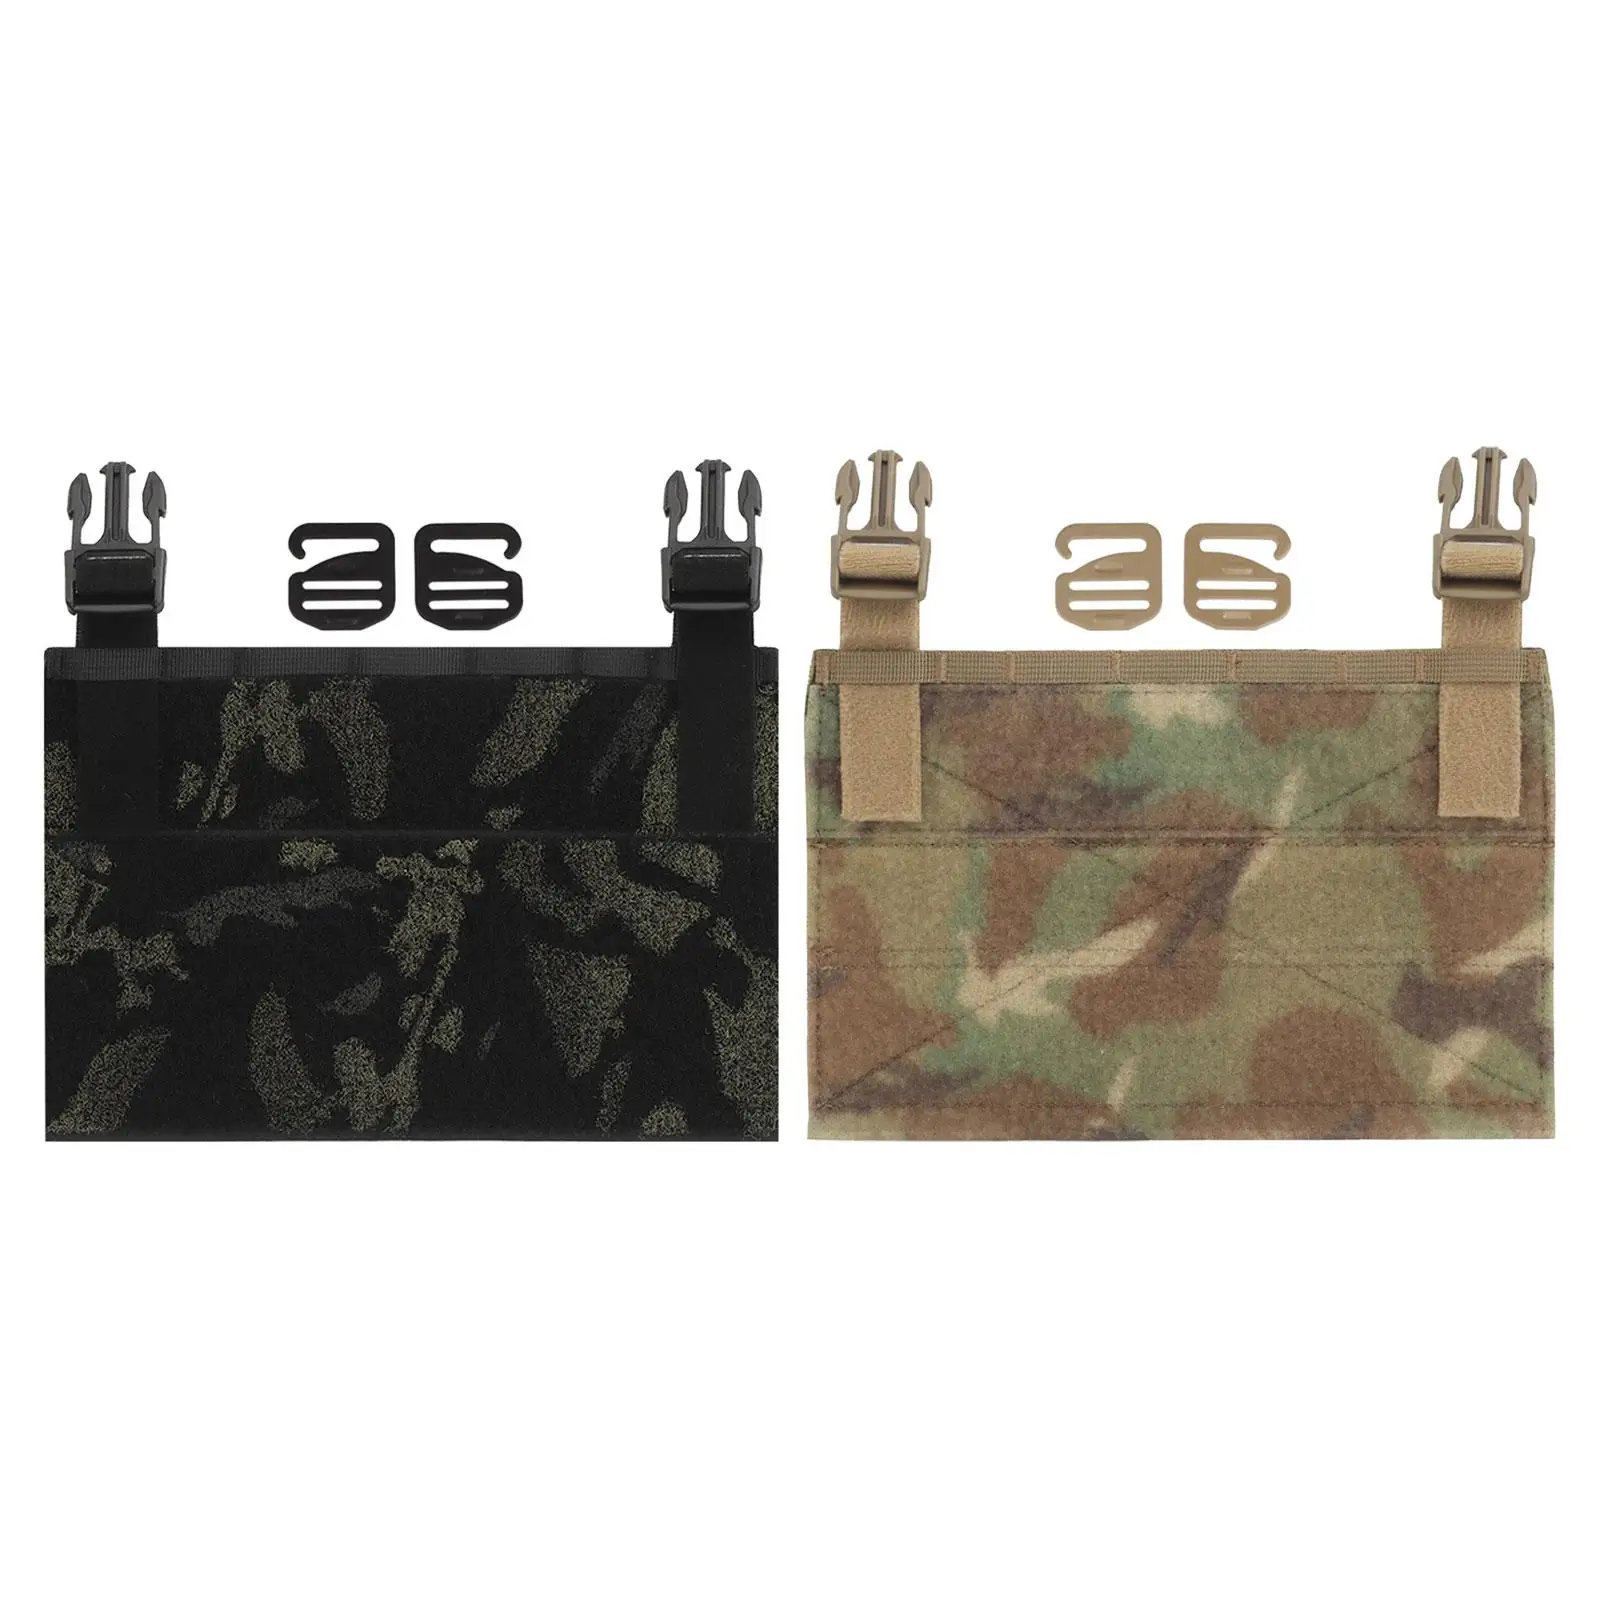 Gaming Vest Front Panel Adapter Accessory Quick Release Equipment for Outdoor Activities Sports Camping